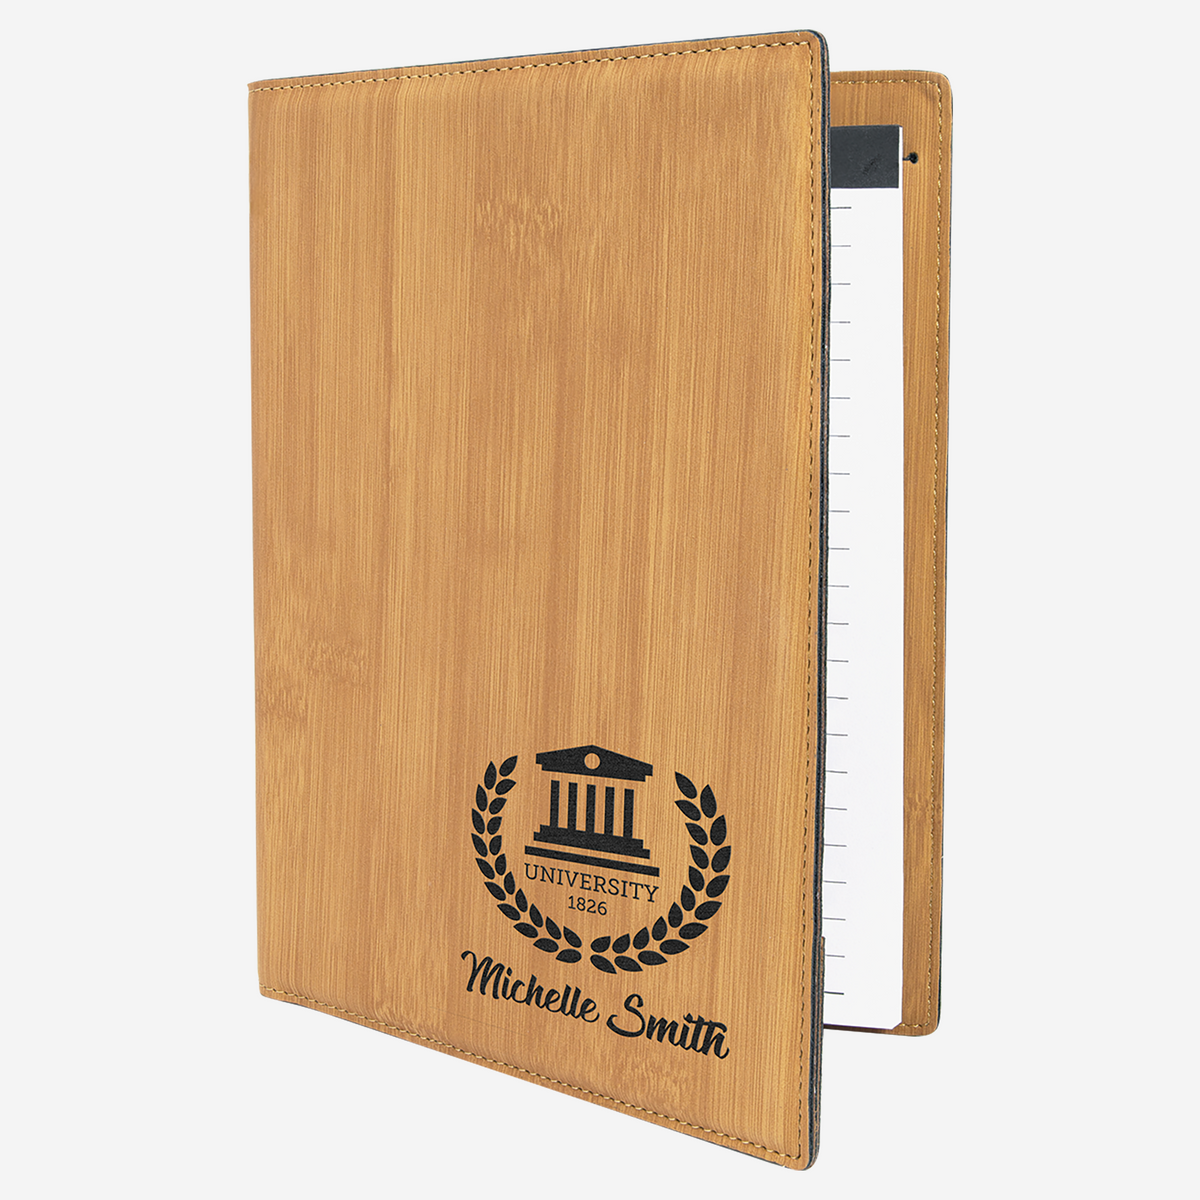 7" x 9" Laserable Bamboo Wood Leatherette Small Portfolio with Notepad partial open view with University Logo and notepad showing in partial view